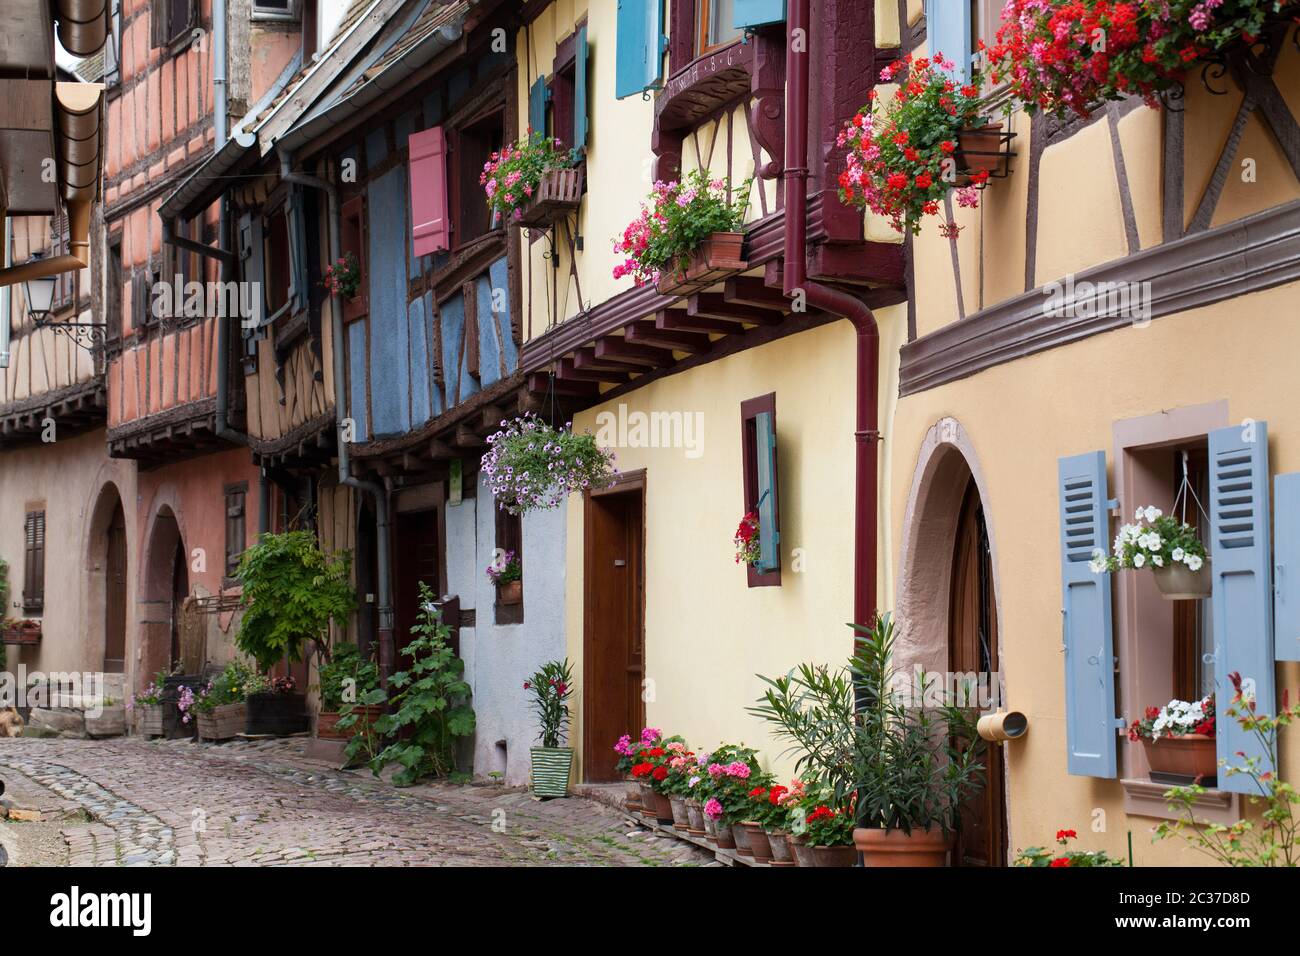 Street with half-timbered medieval houses in Eguisheim village along the famous wine route in Alsace, France Stock Photo